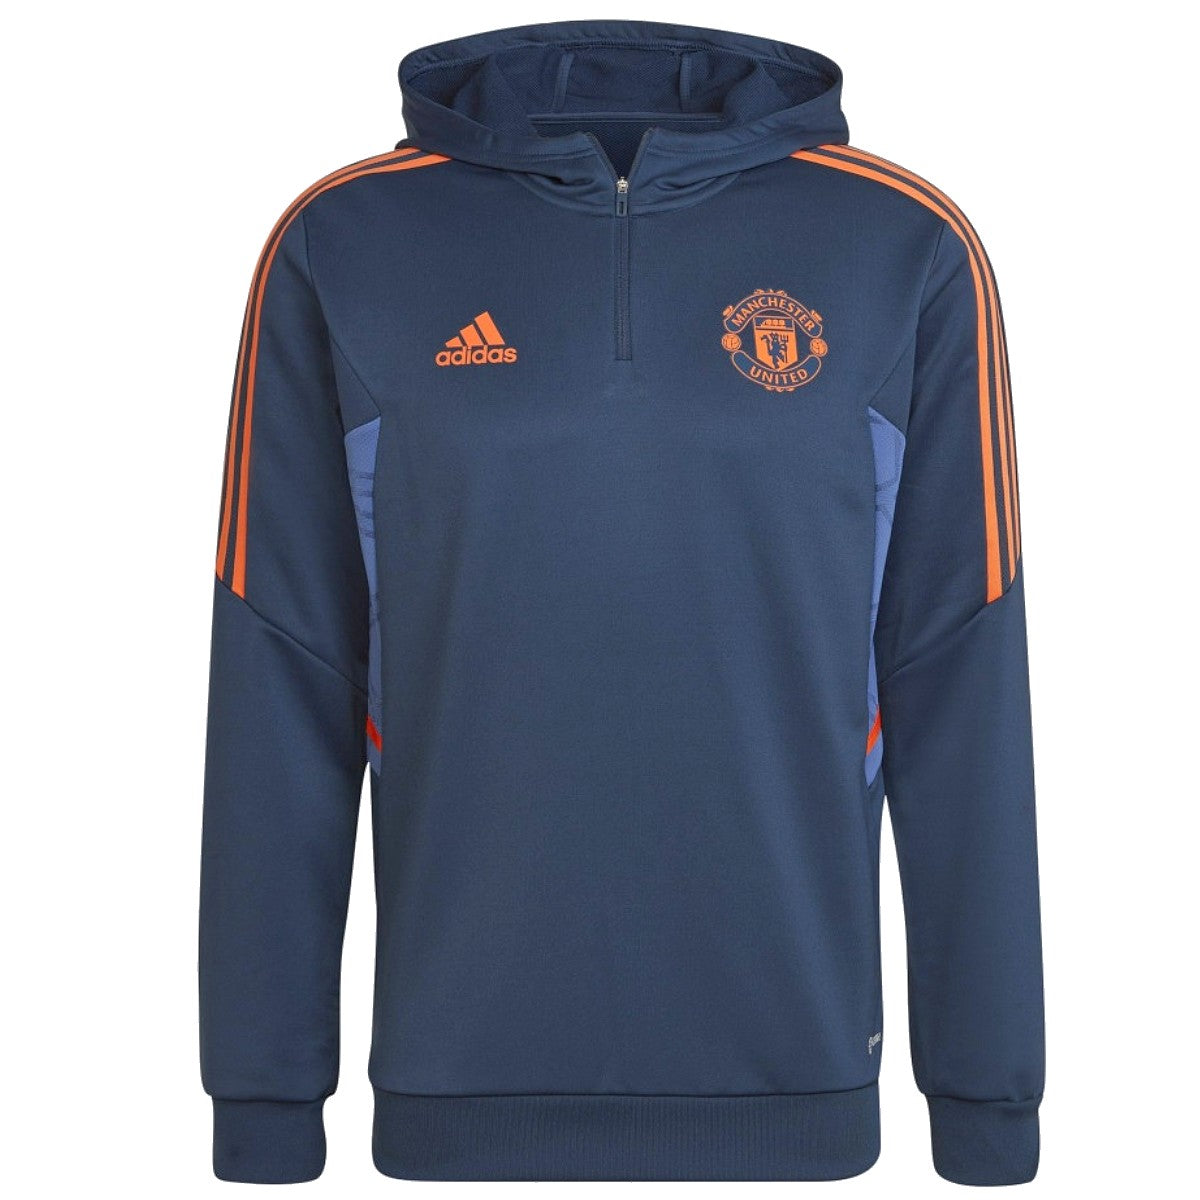 United hooded training technical soccer tracksuit - Adidas – SoccerTracksuits.com